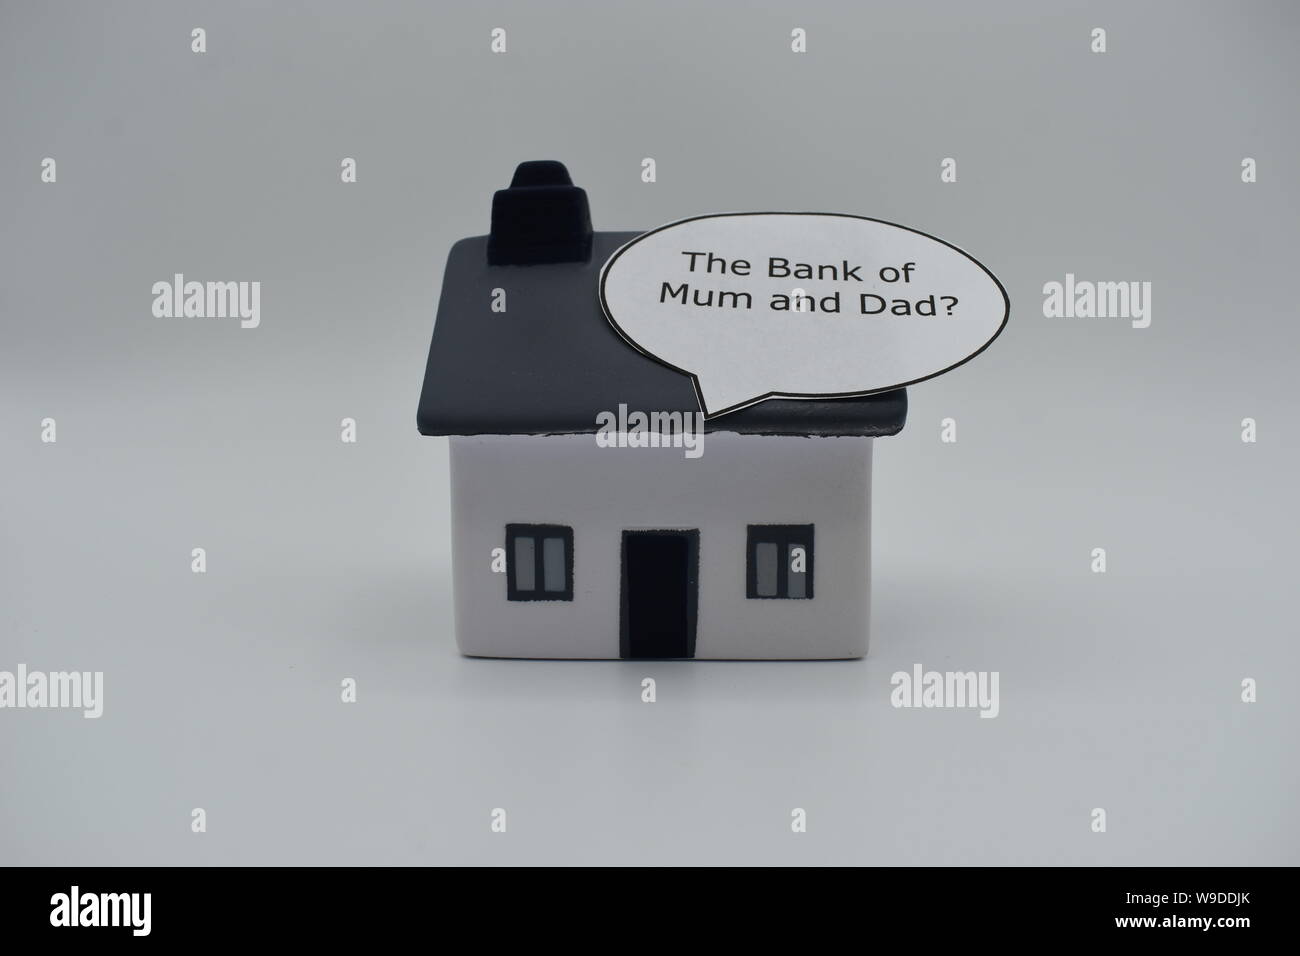 A model house with the words 'The Bank of Mum and Dad?' in a speech bubble on the roof. Stock Photo